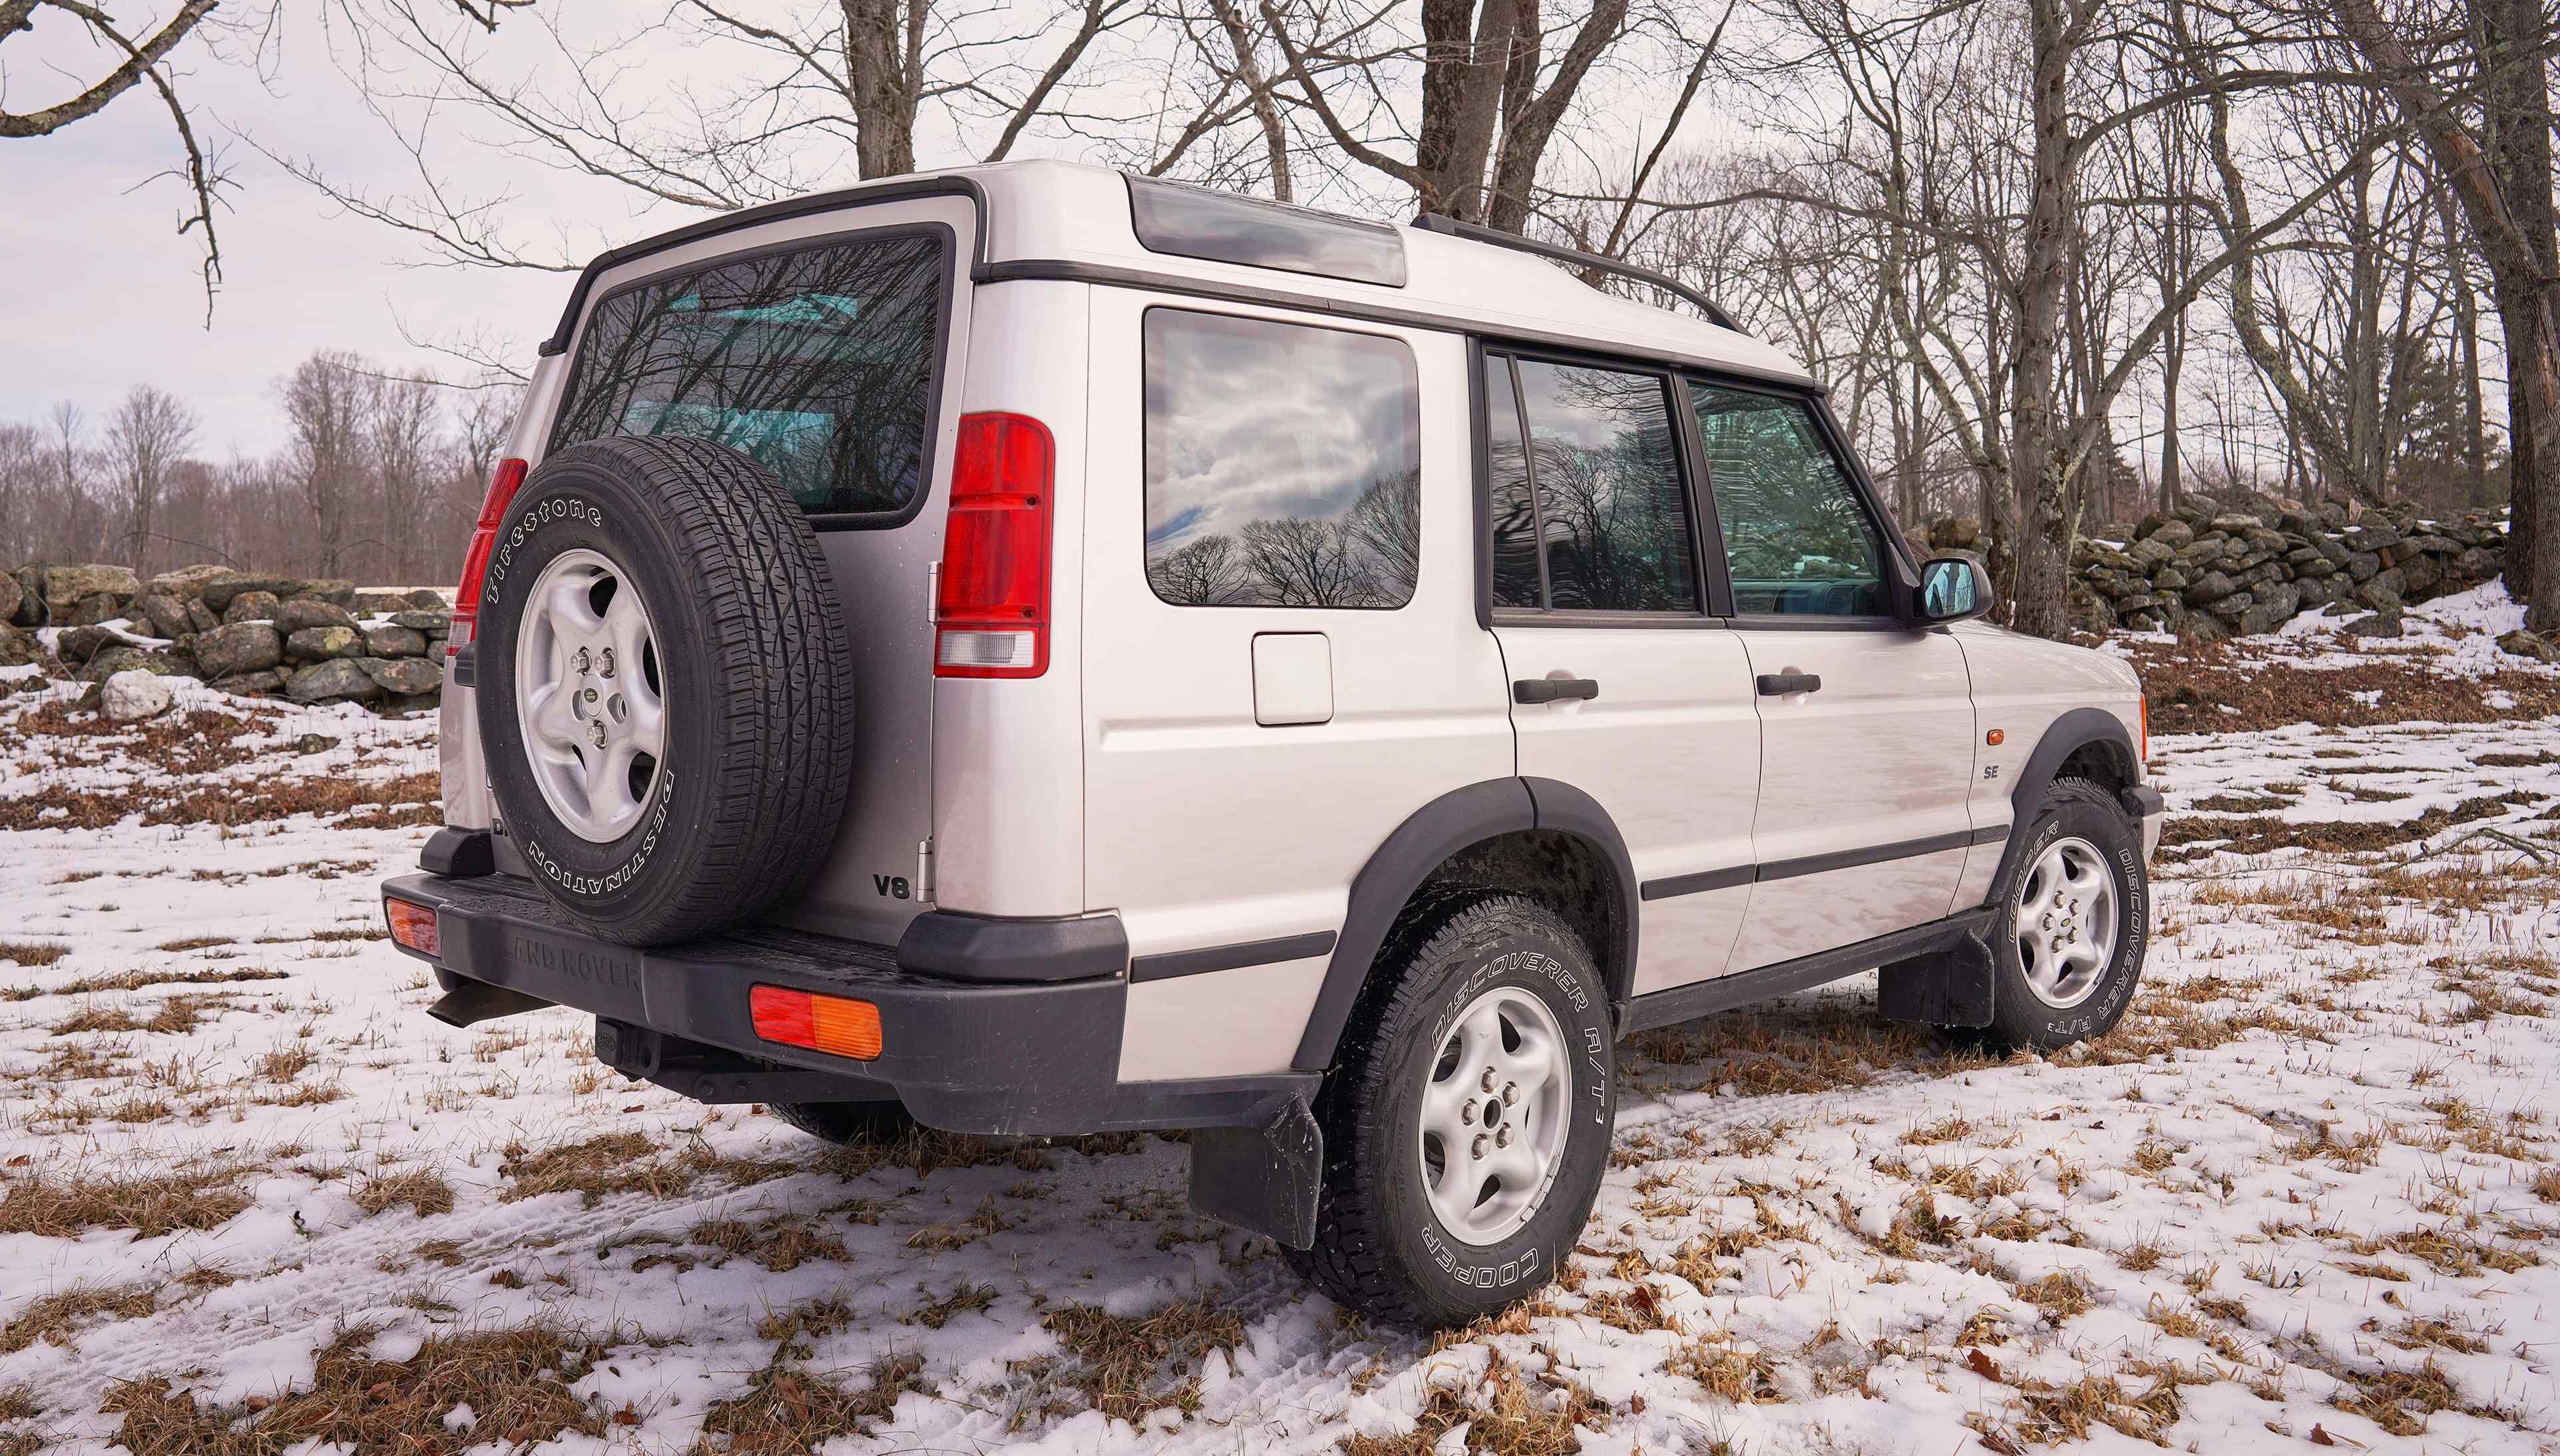 2001-land-rover-discovery-ii-for-sale-02